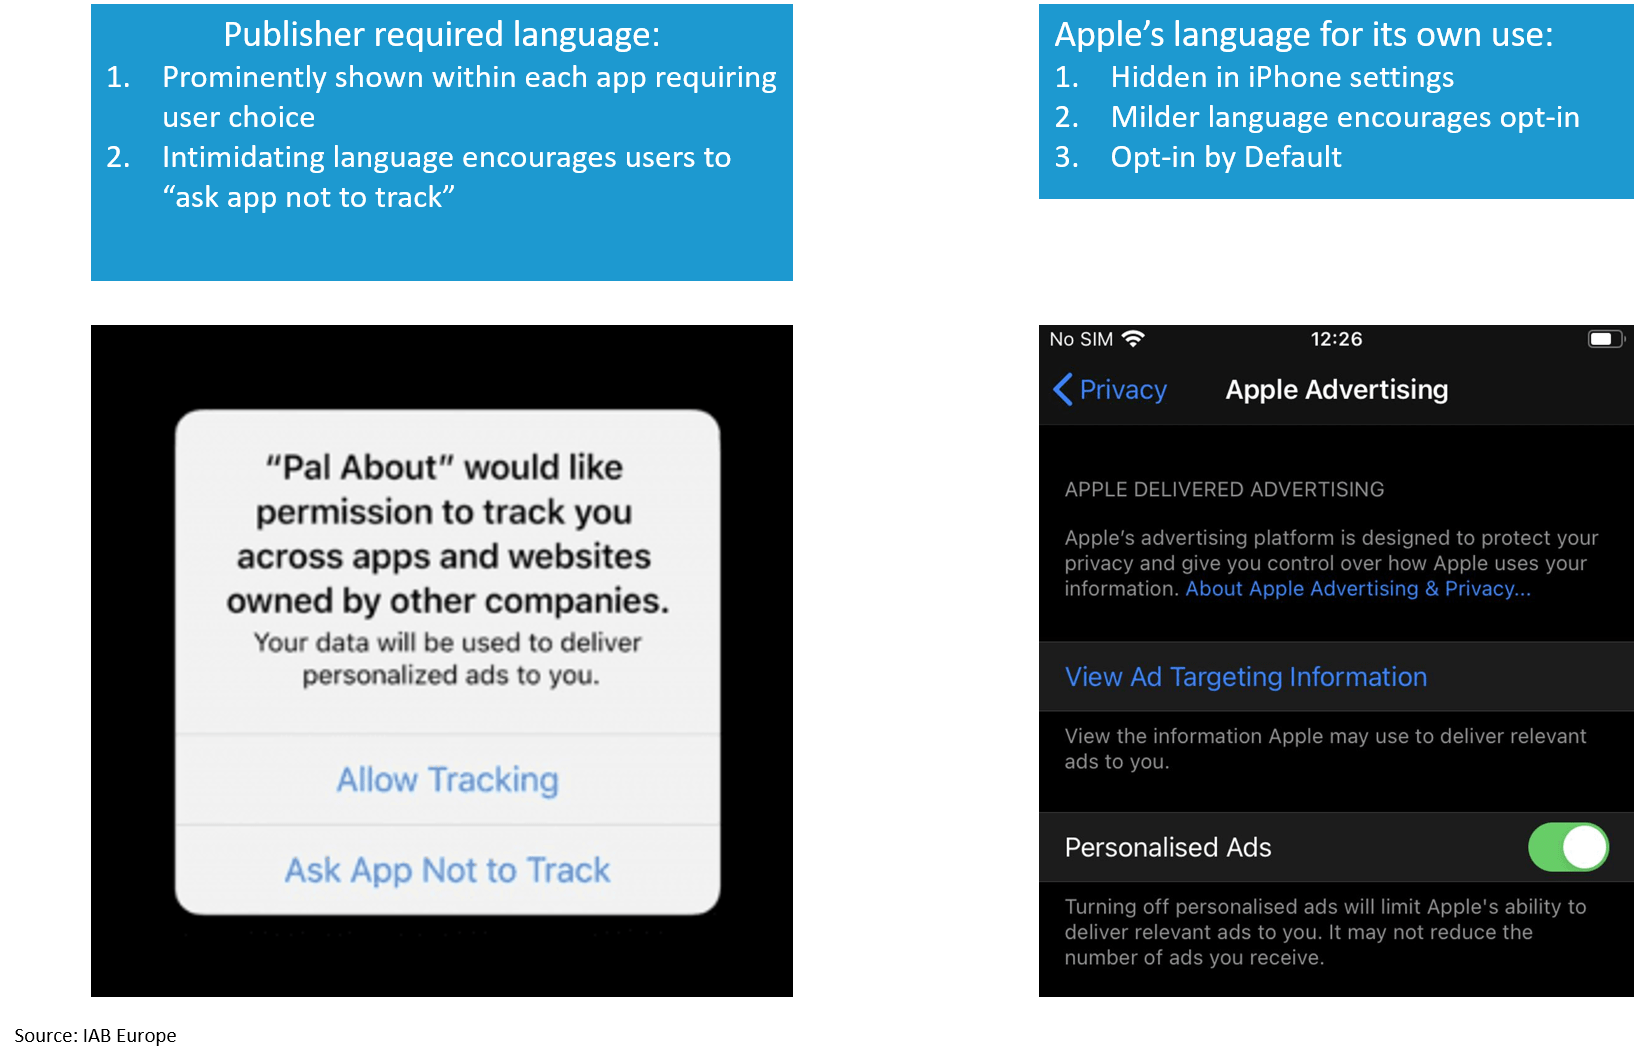 comparison of apple language for itself vs for publishers